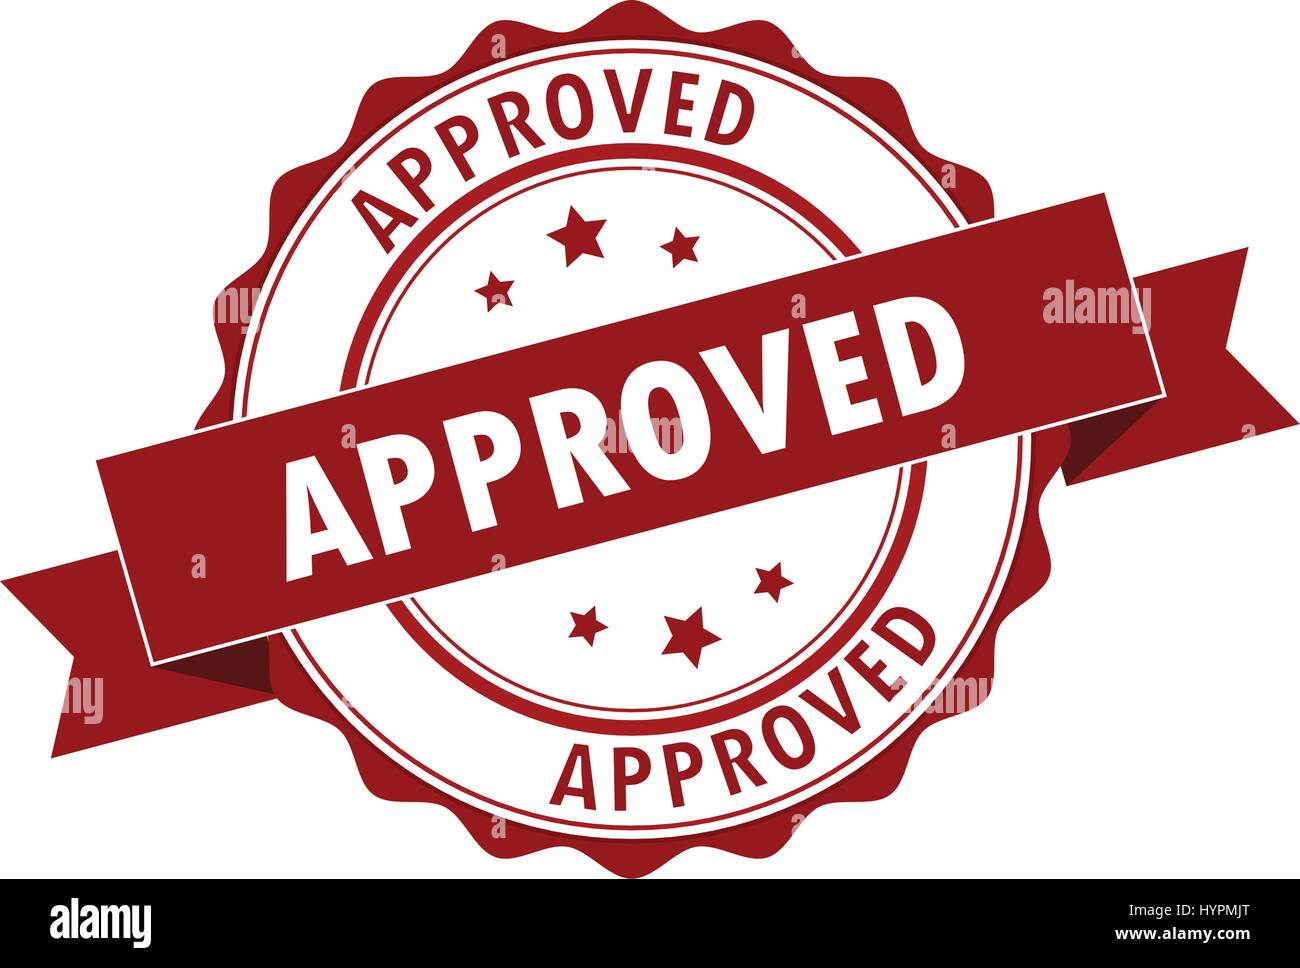 Approved stamp illustration Stock Vector